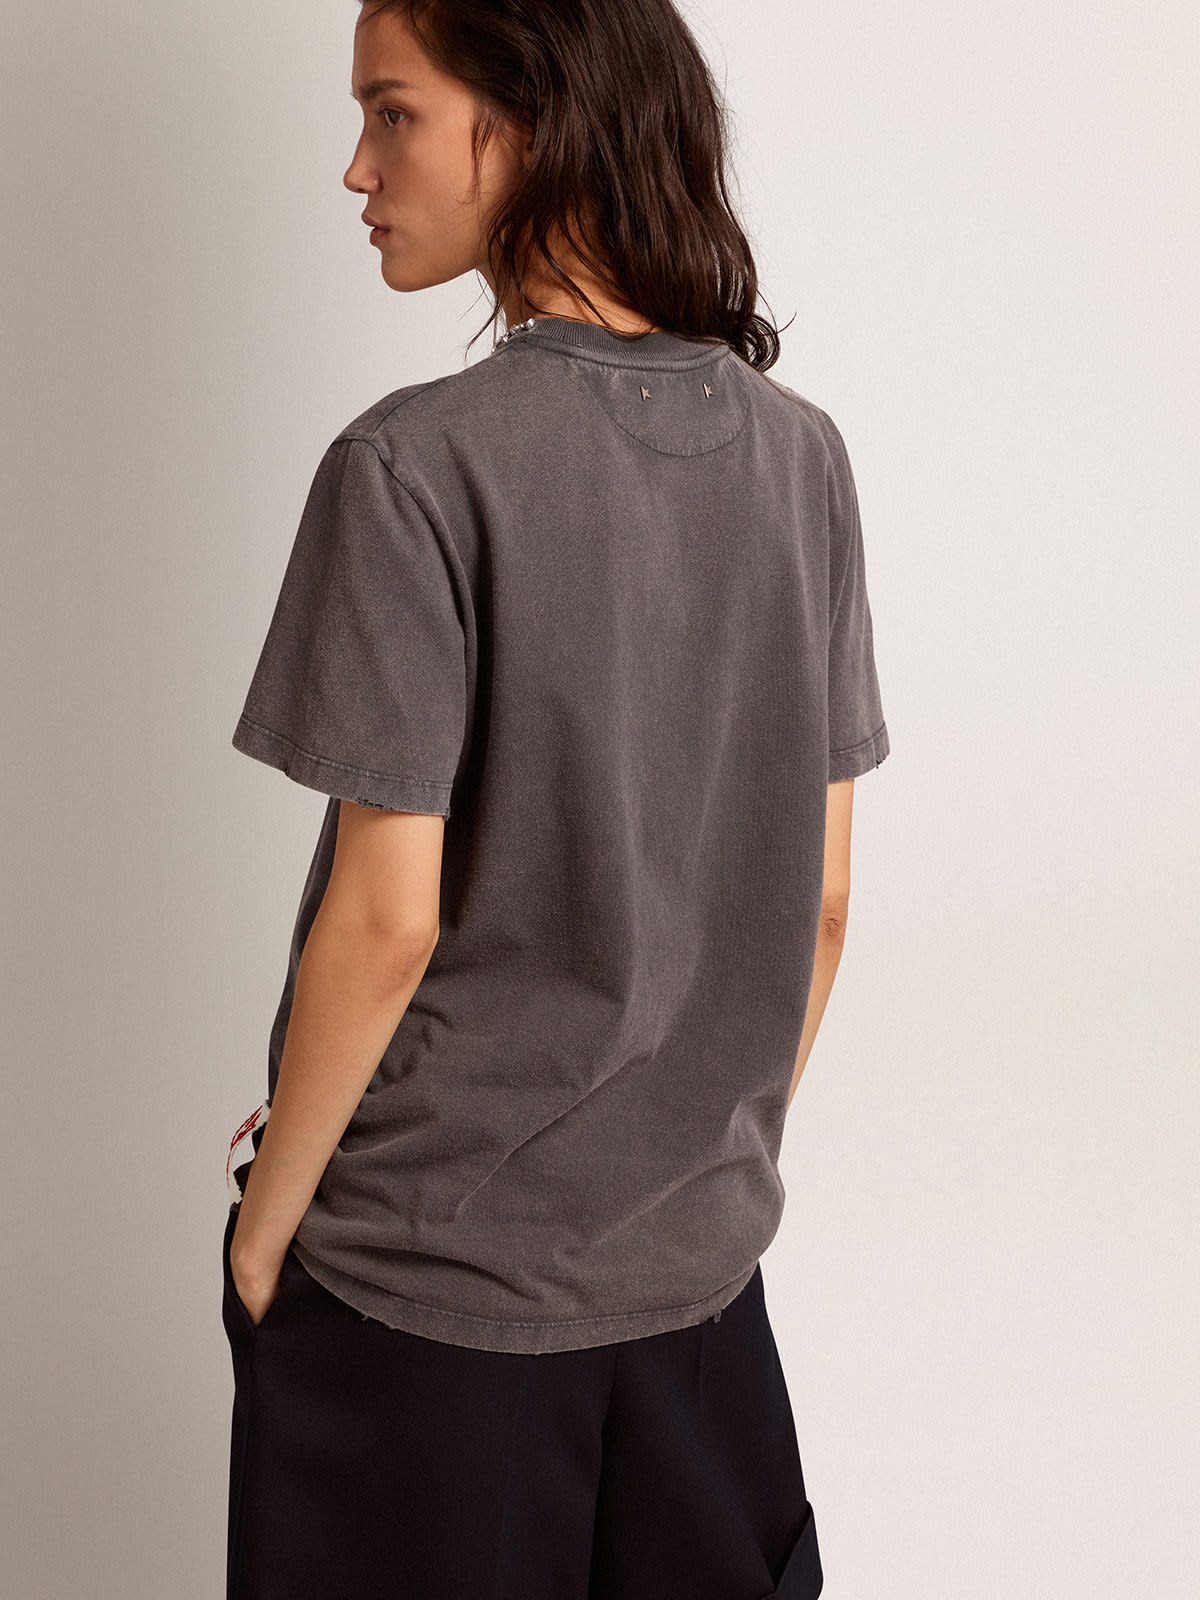 Golden Goose - Golden Collection T-shirt in anthracite gray with cabochon crystals in 